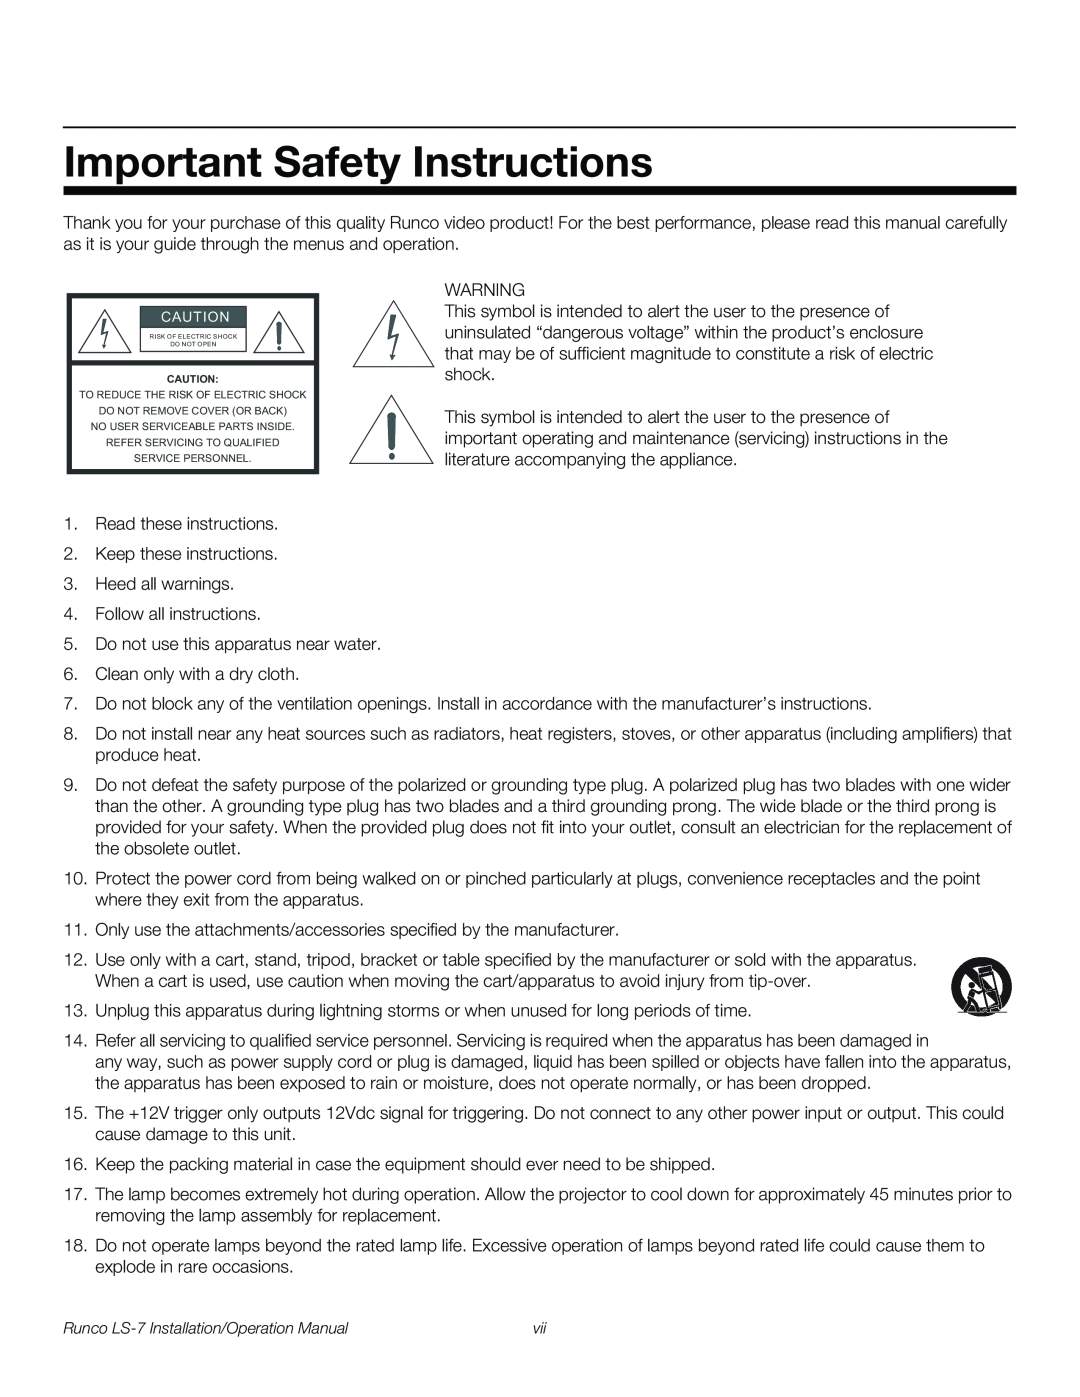 Runco LS-7 operation manual Important Safety Instructions 